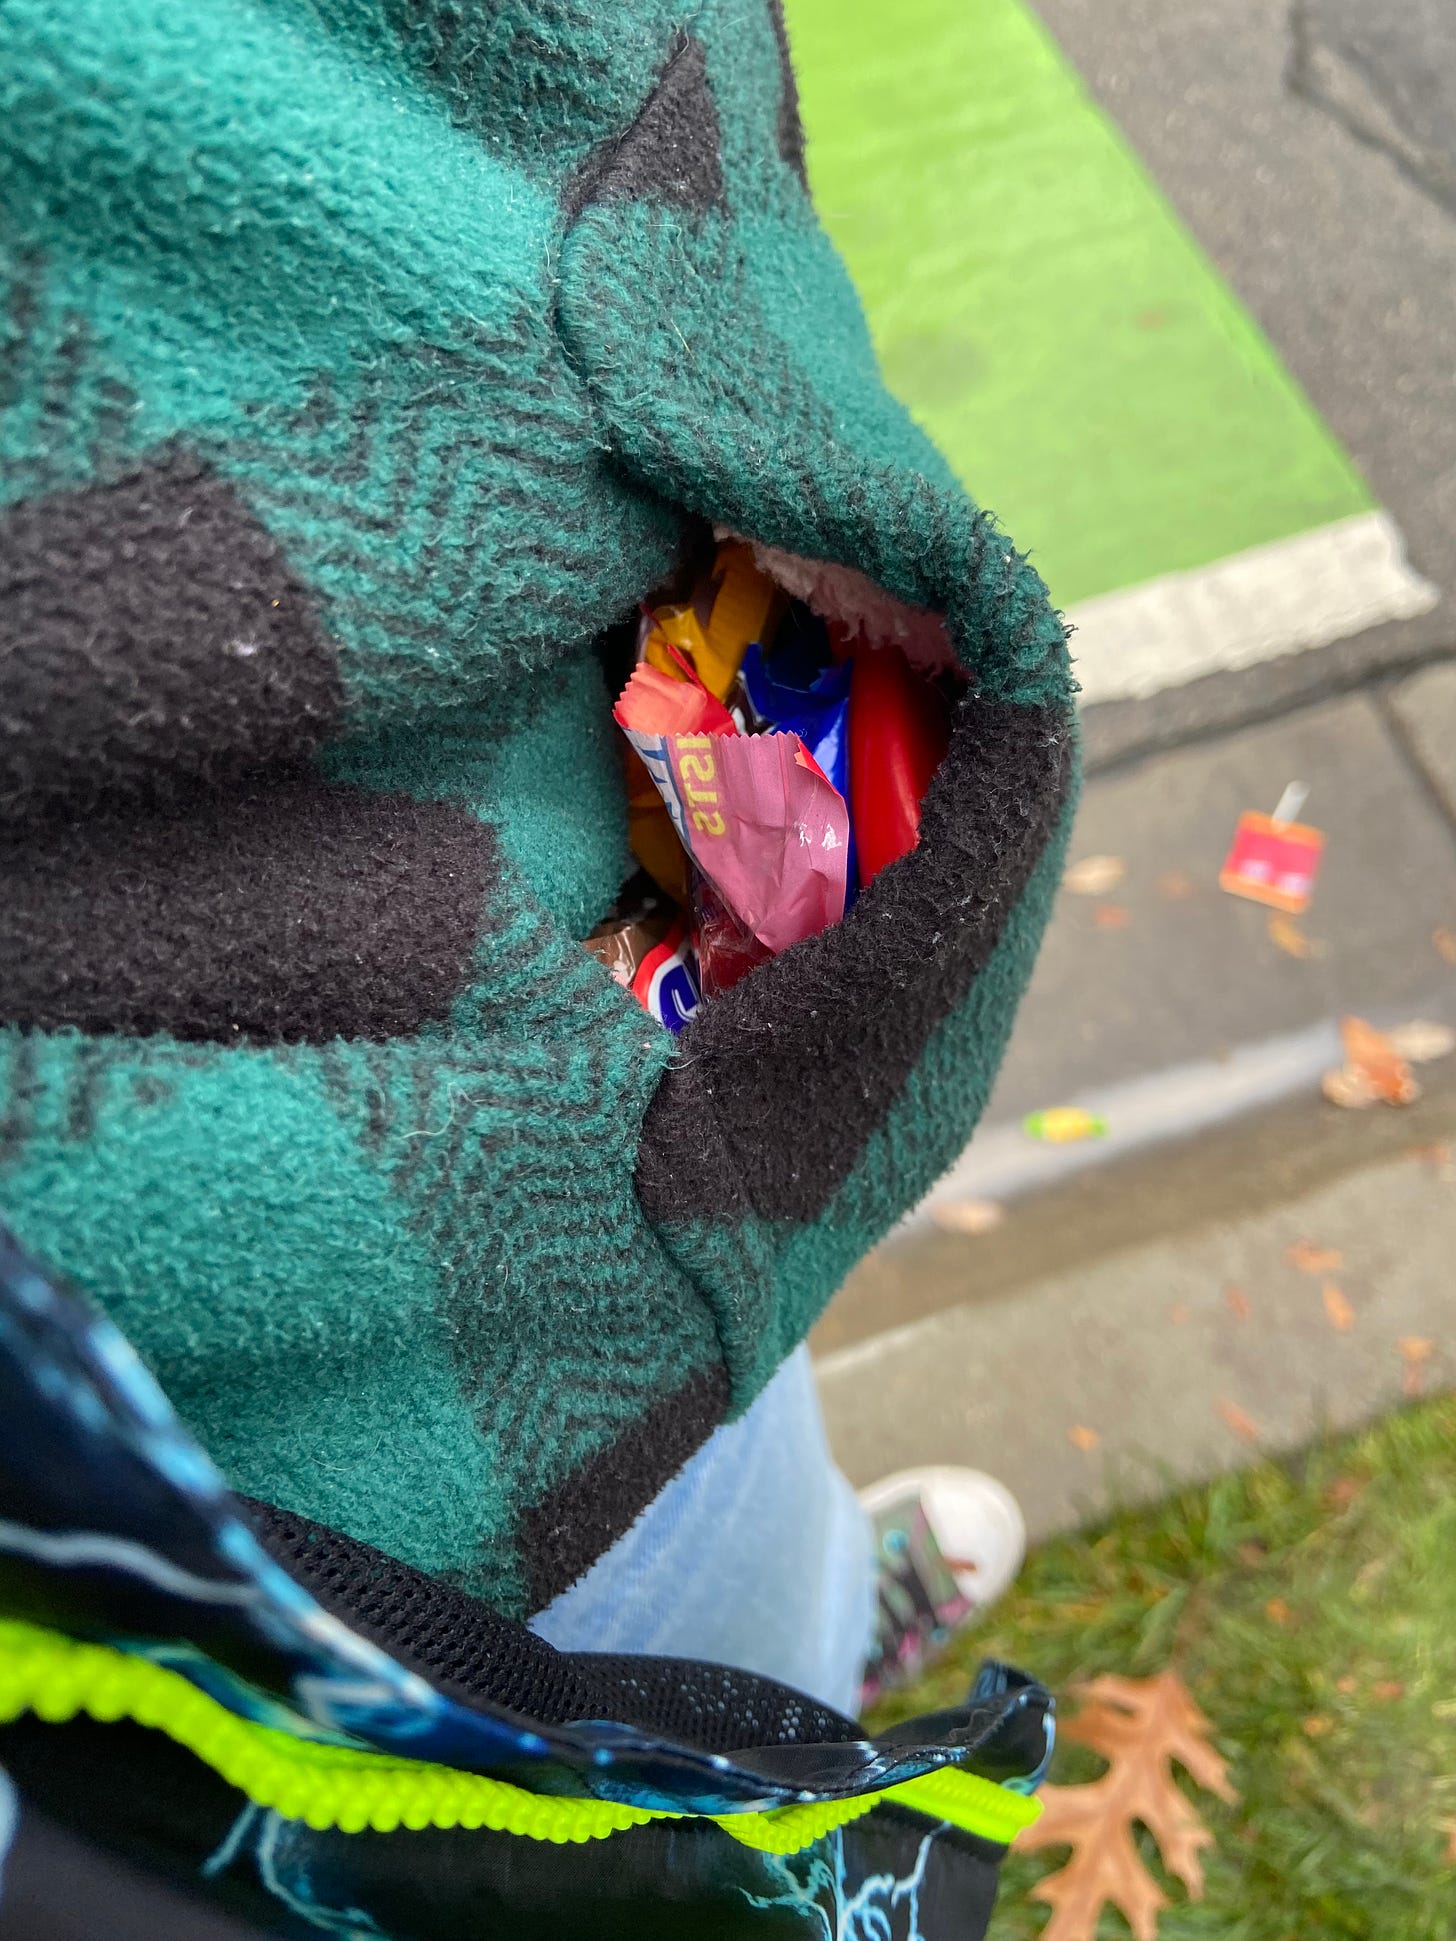 Candy in the pocket of a girl watching the parade